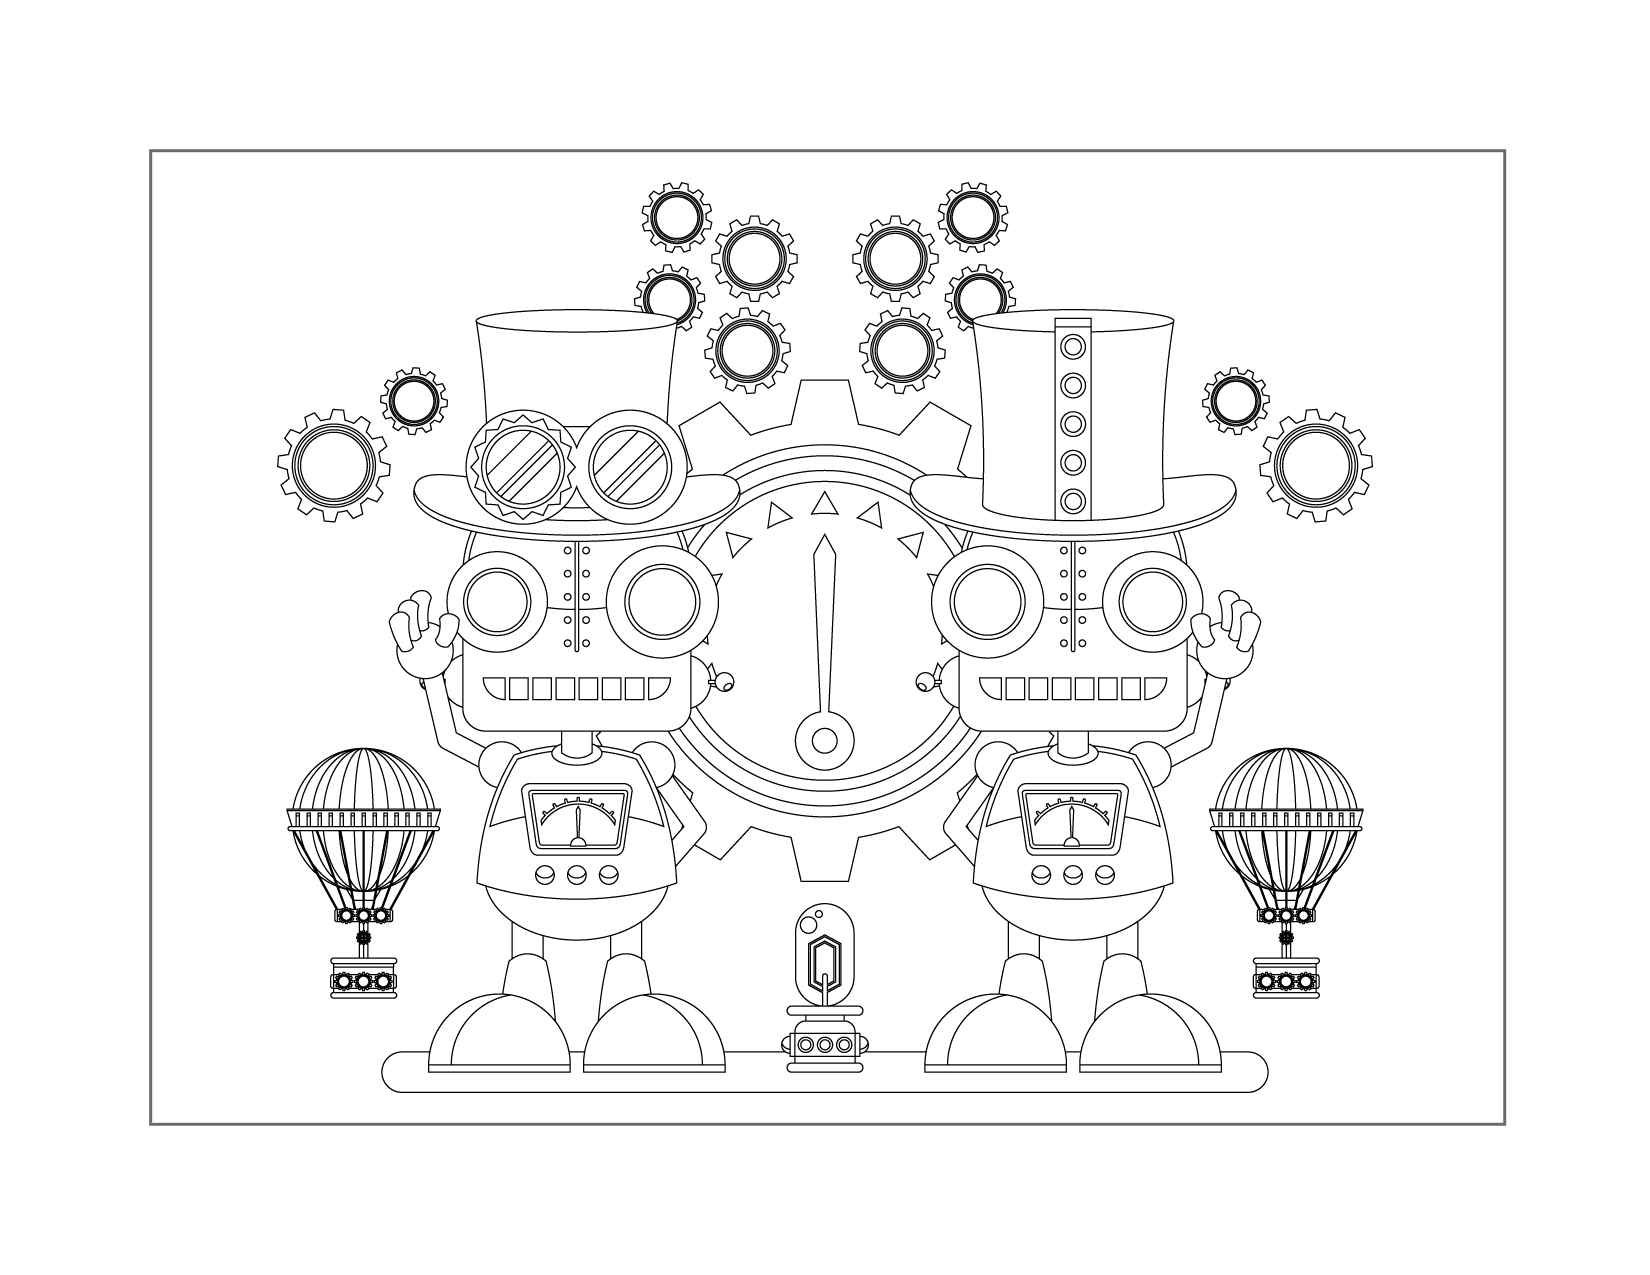 Steampunk Robots Coloring Page